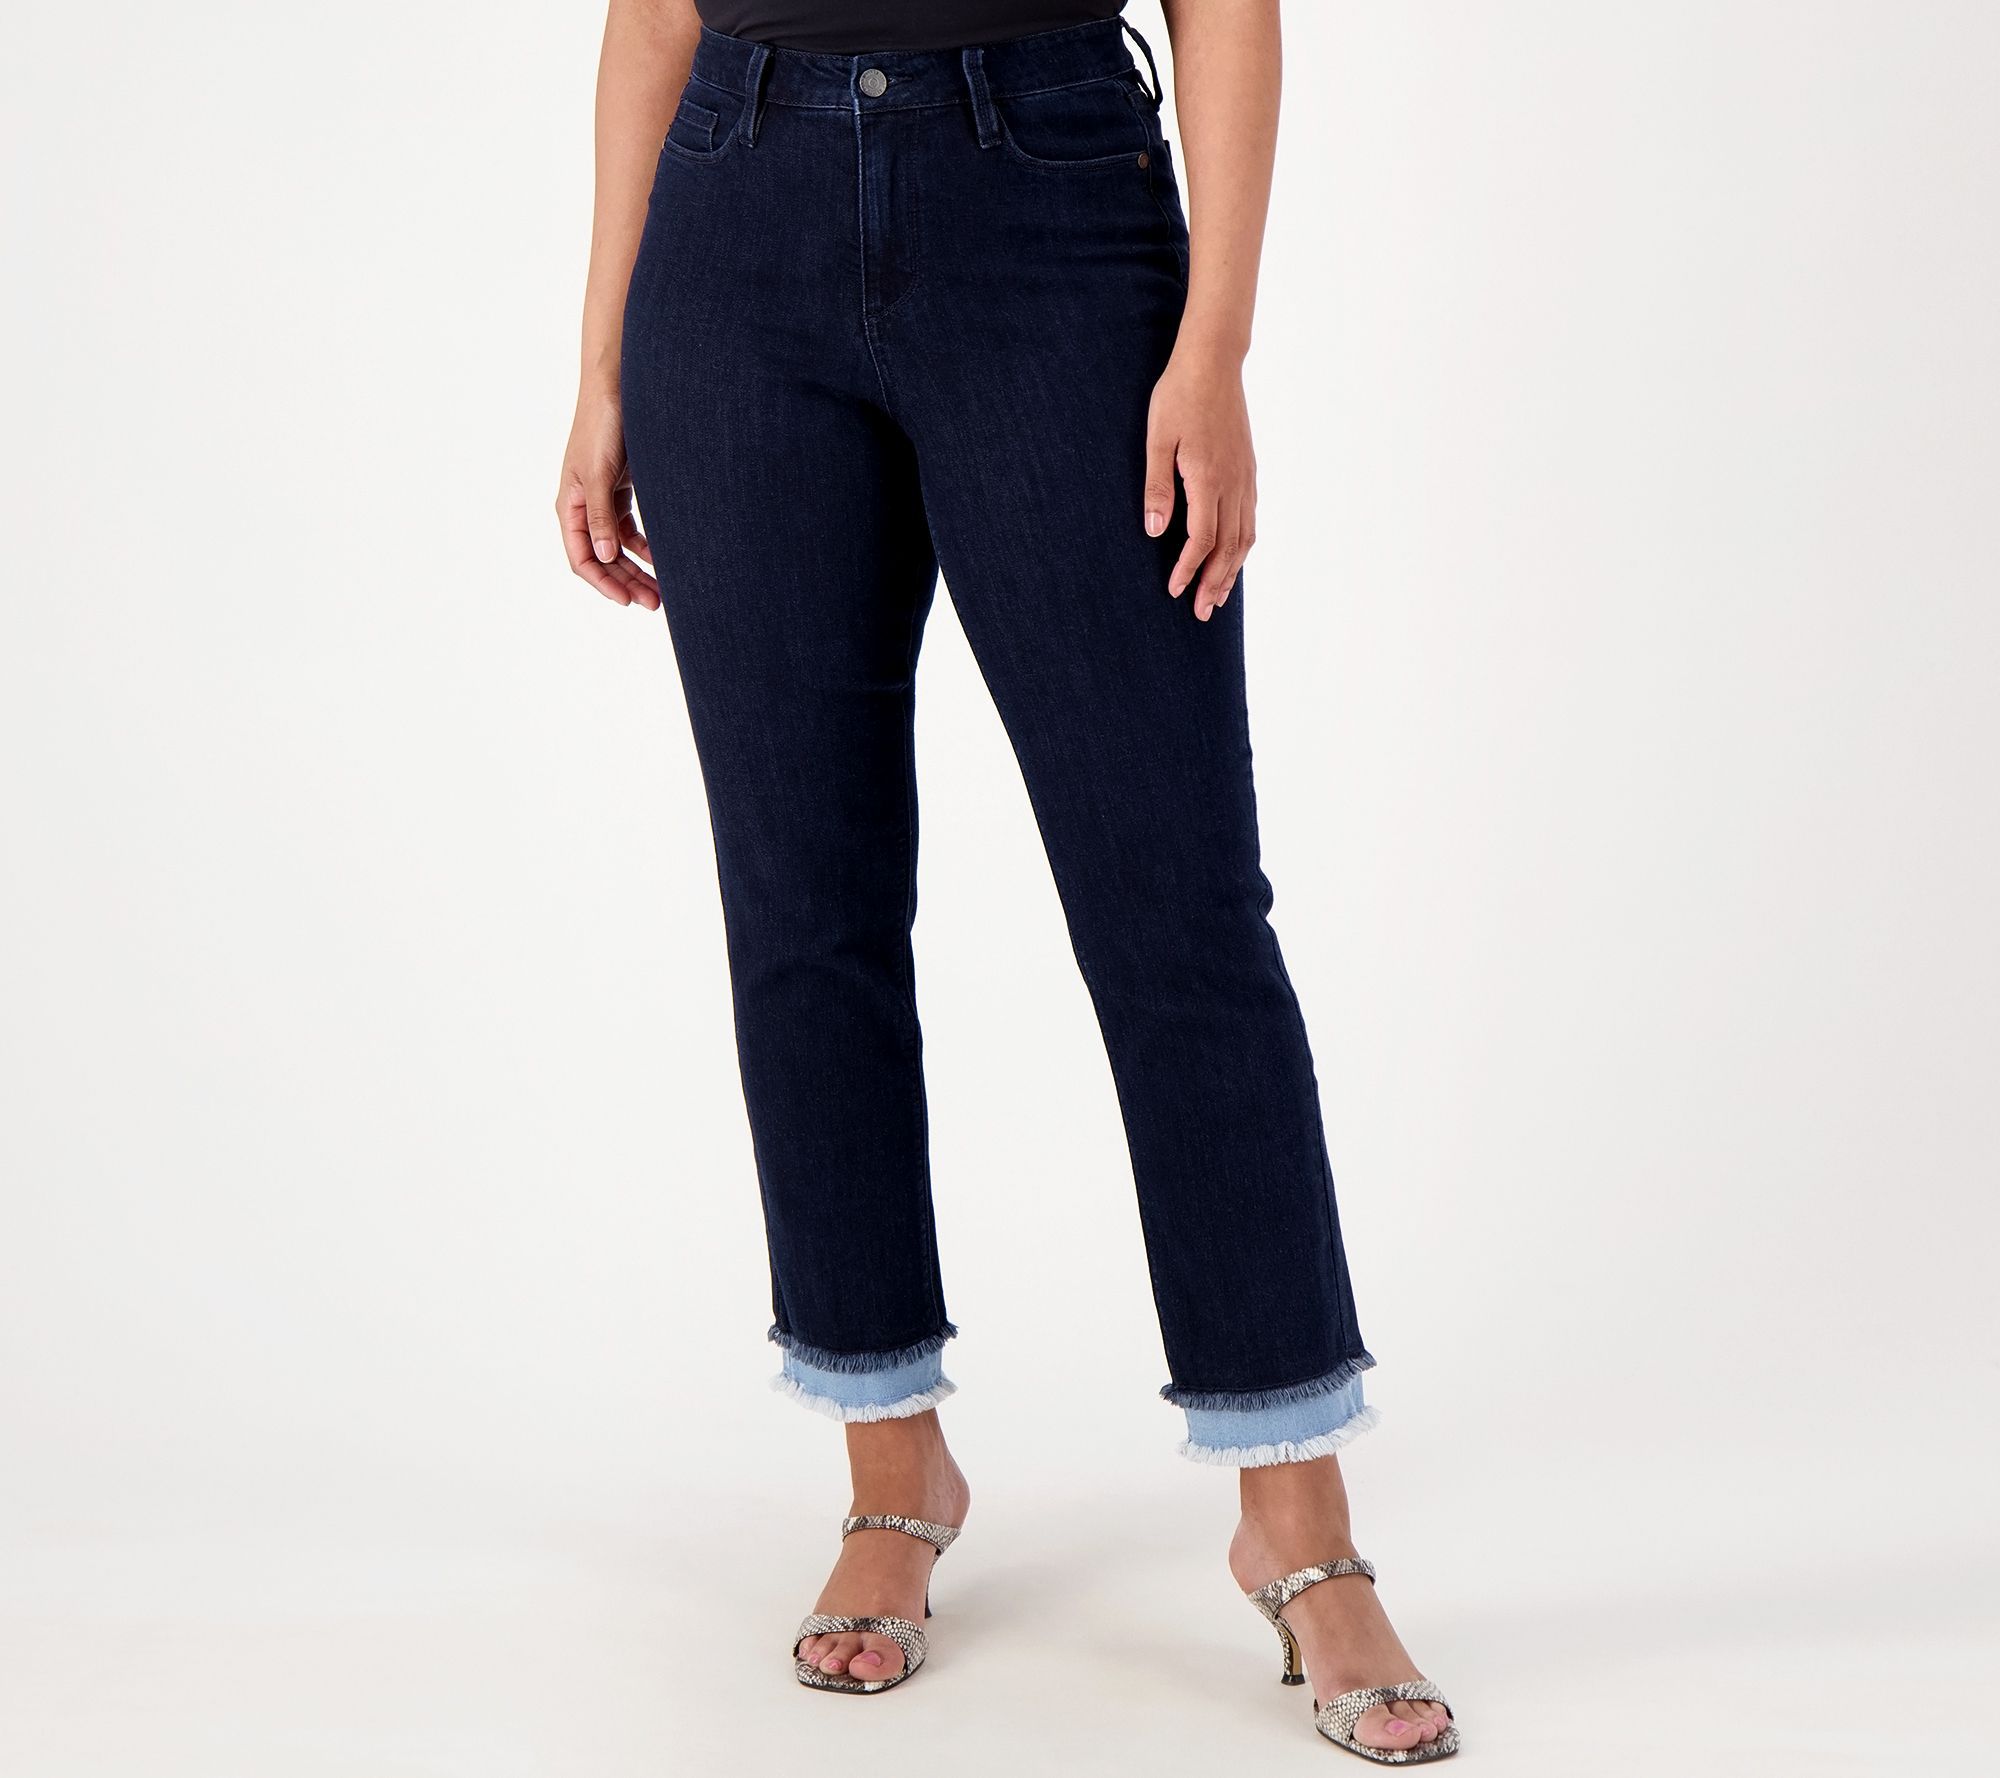 GRAVER By Susan Graver Stretch Denim French Terry Jean, 53% OFF